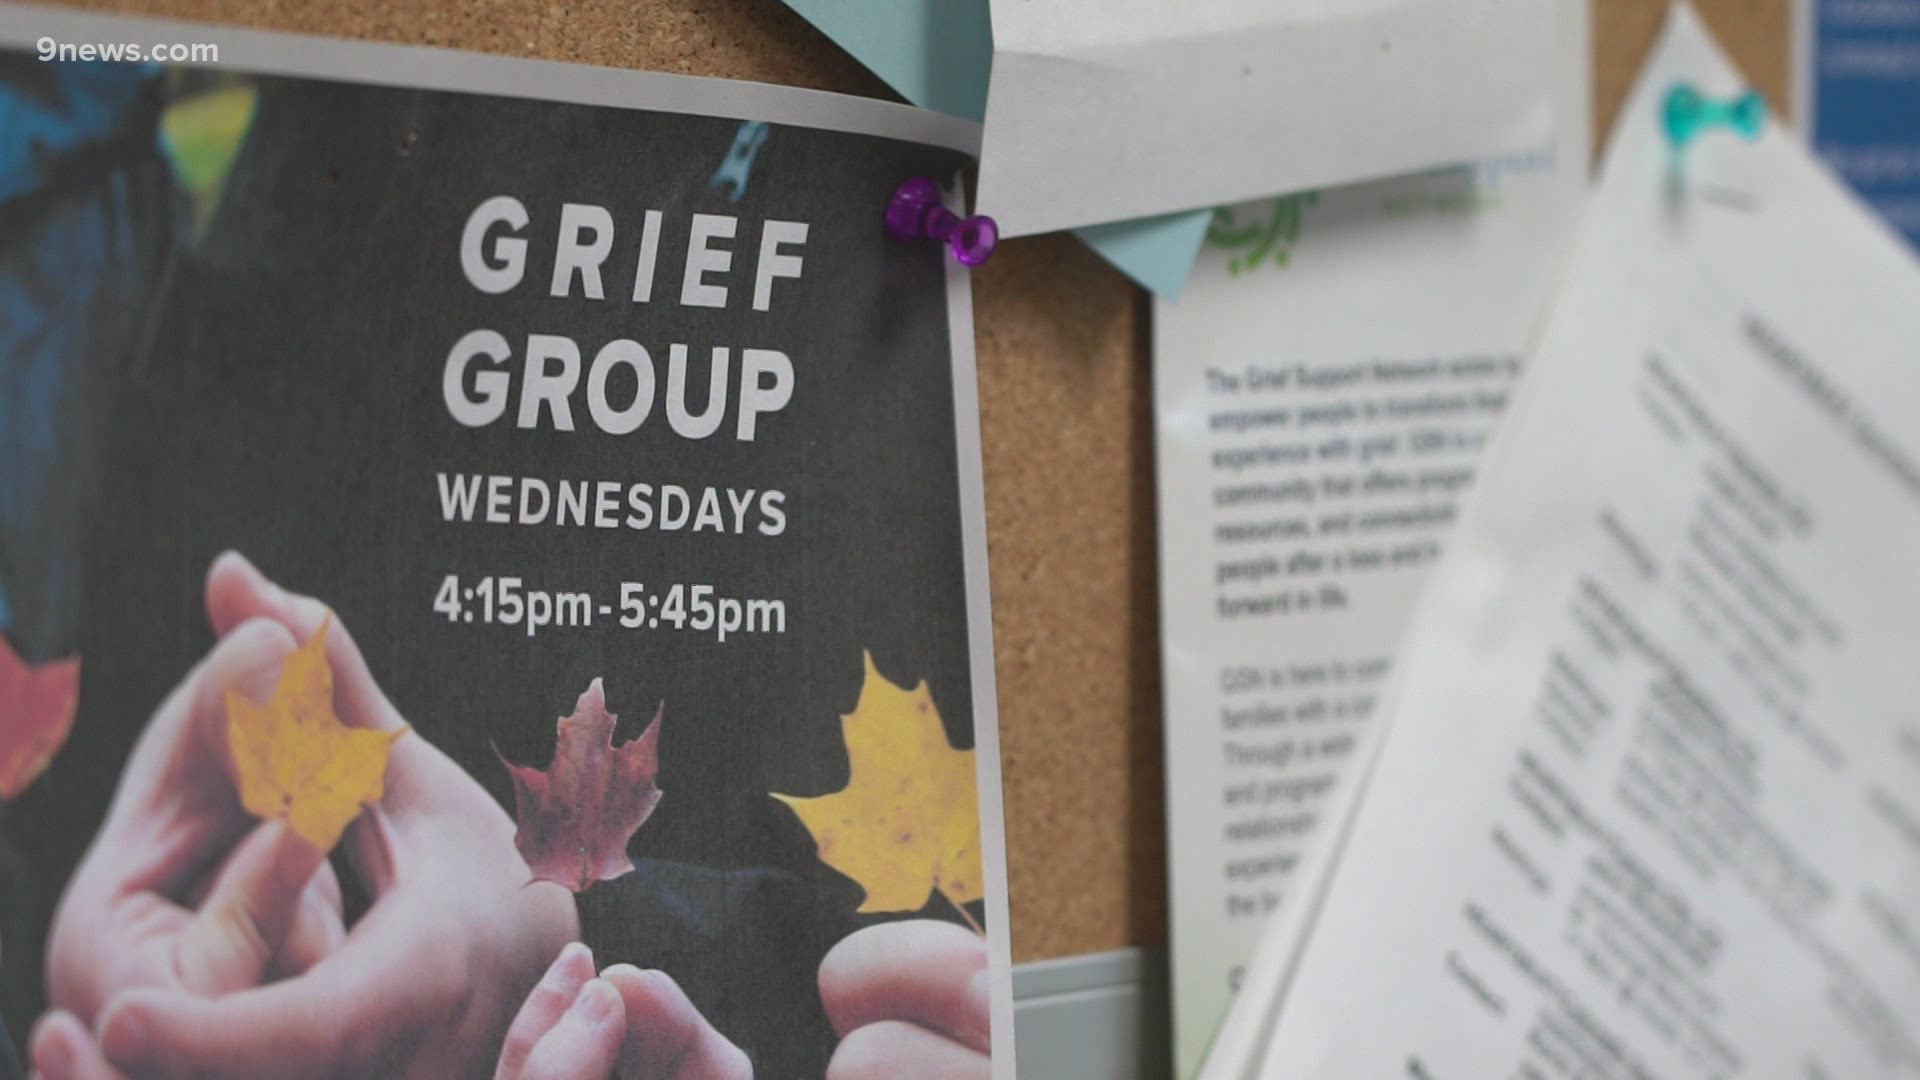 The Naropa Community Counseling Center is offering a free 6-week counseling program for anyone still working through trauma from the Boulder grocery store shooting.